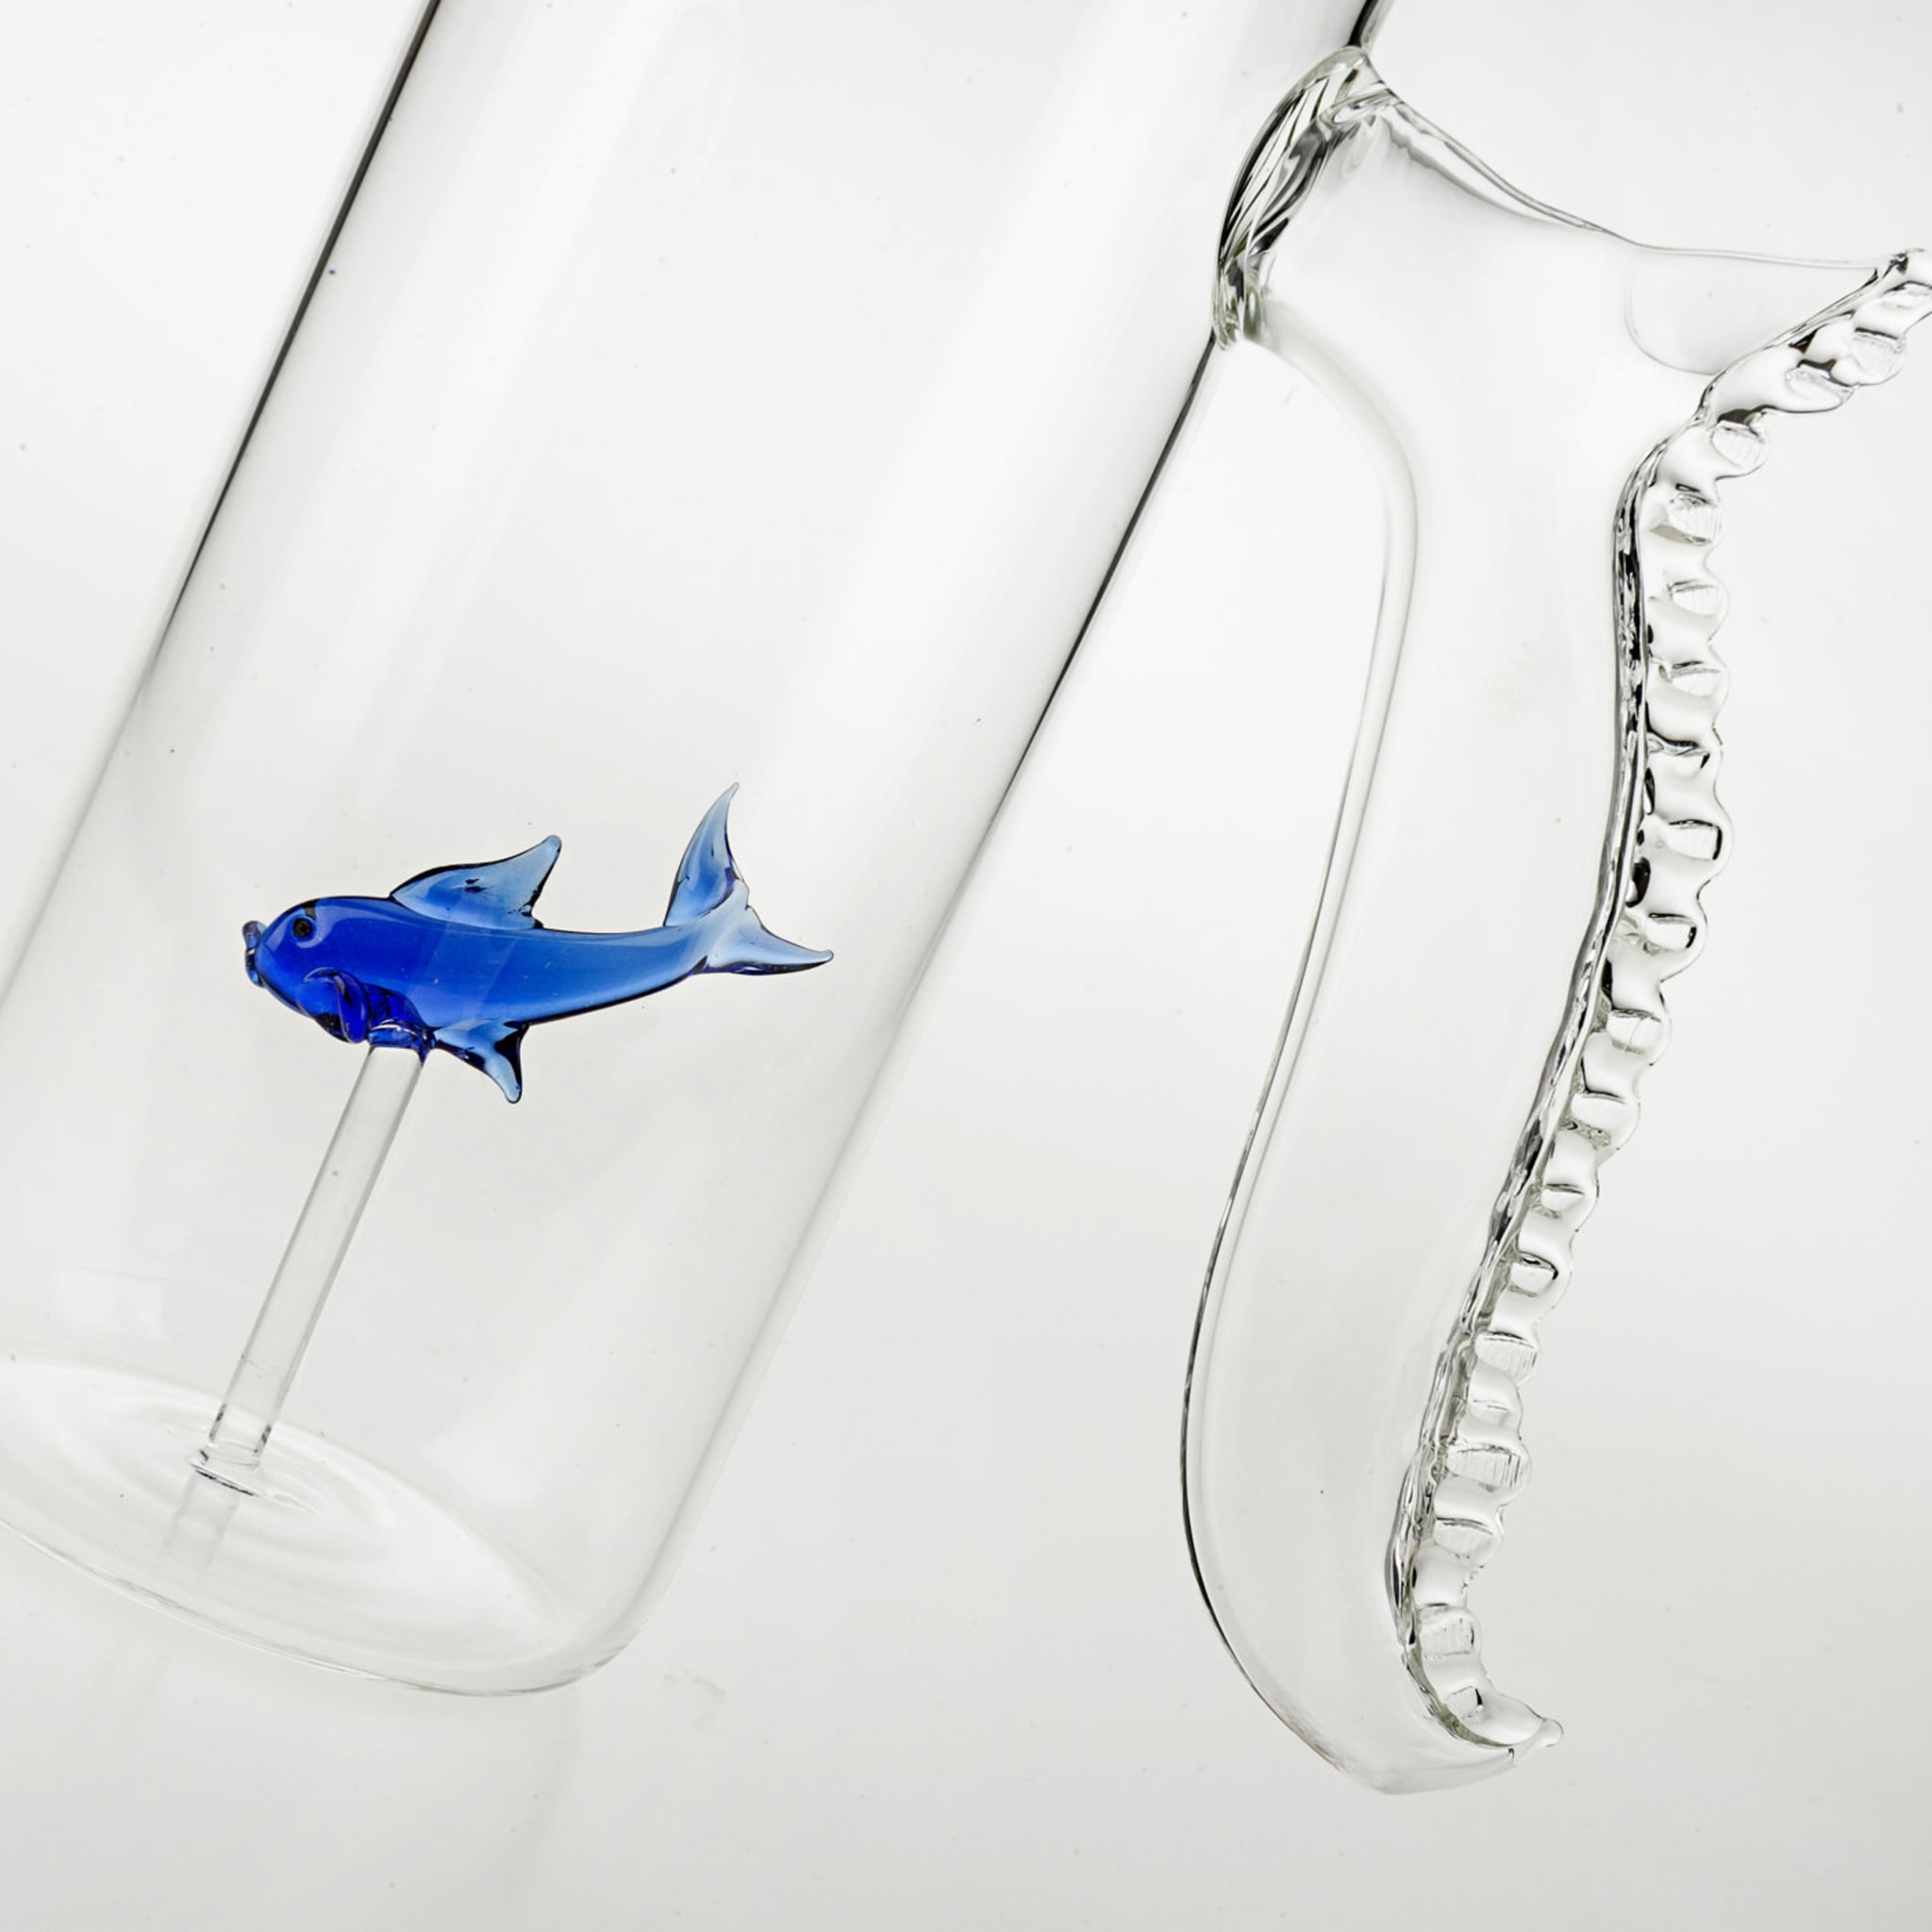 Set of Little Blue Fish Pitcher and Four Little Blue Fish Glasses - Alternative view 2